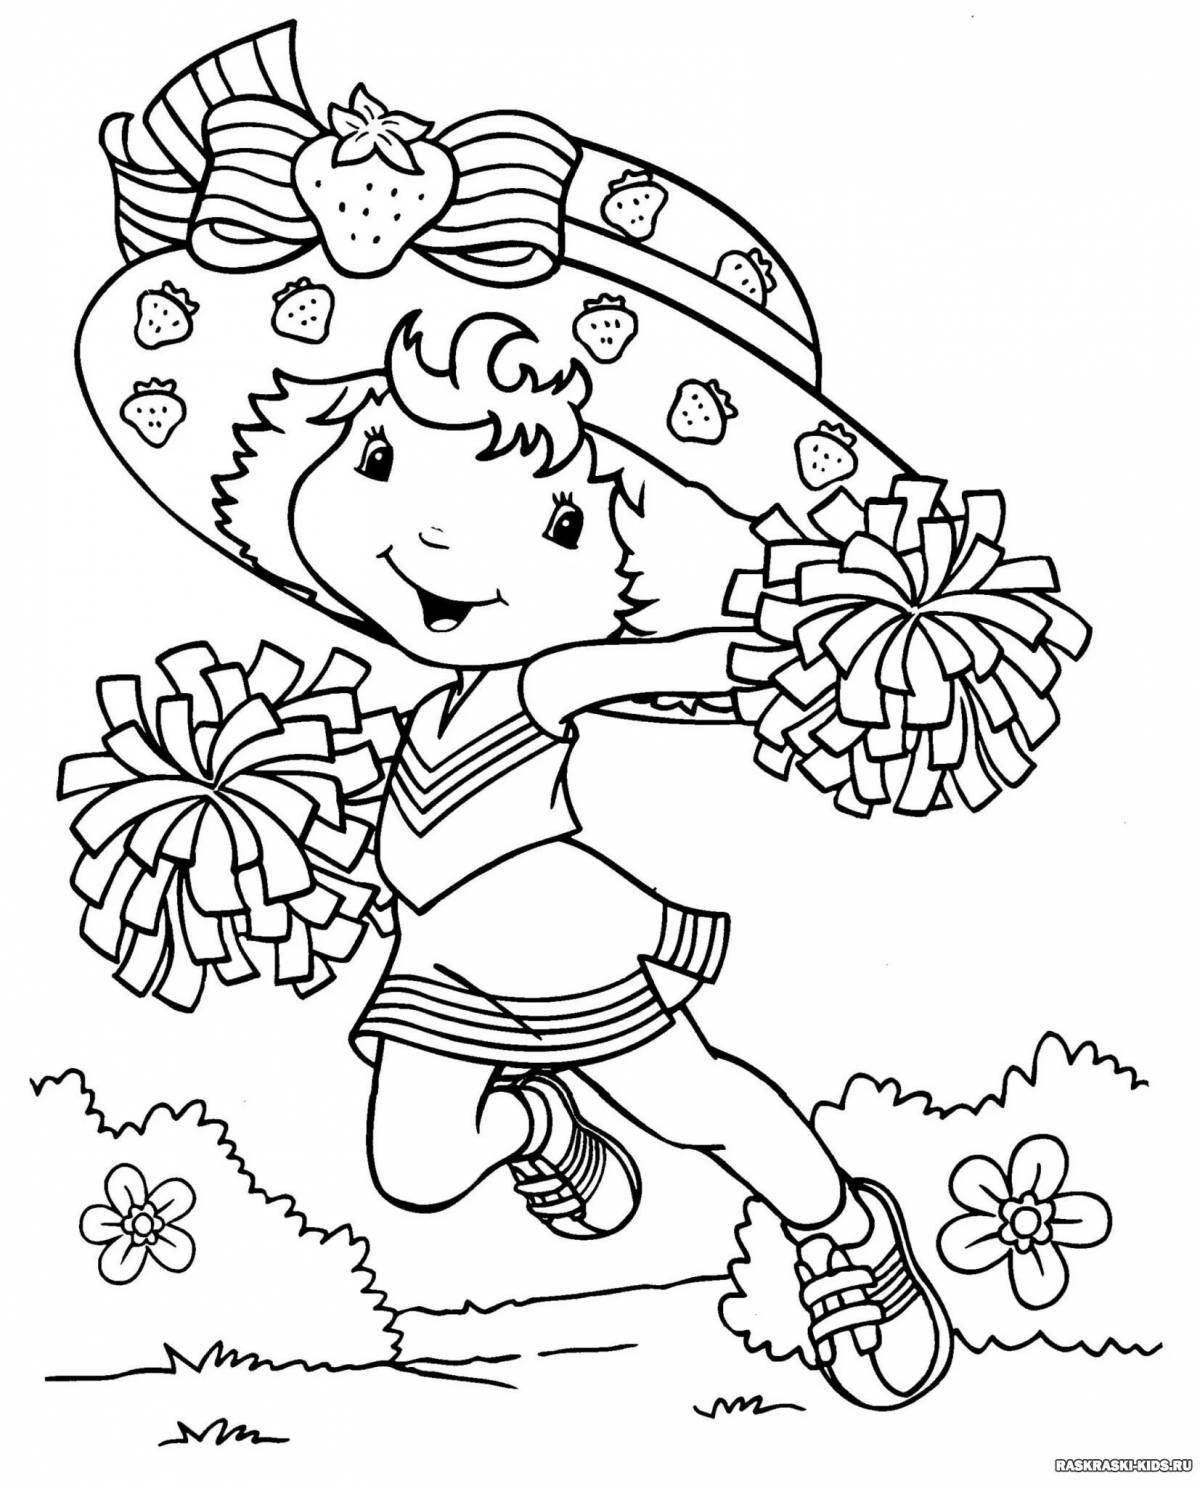 Fun coloring book for 8-10 year olds